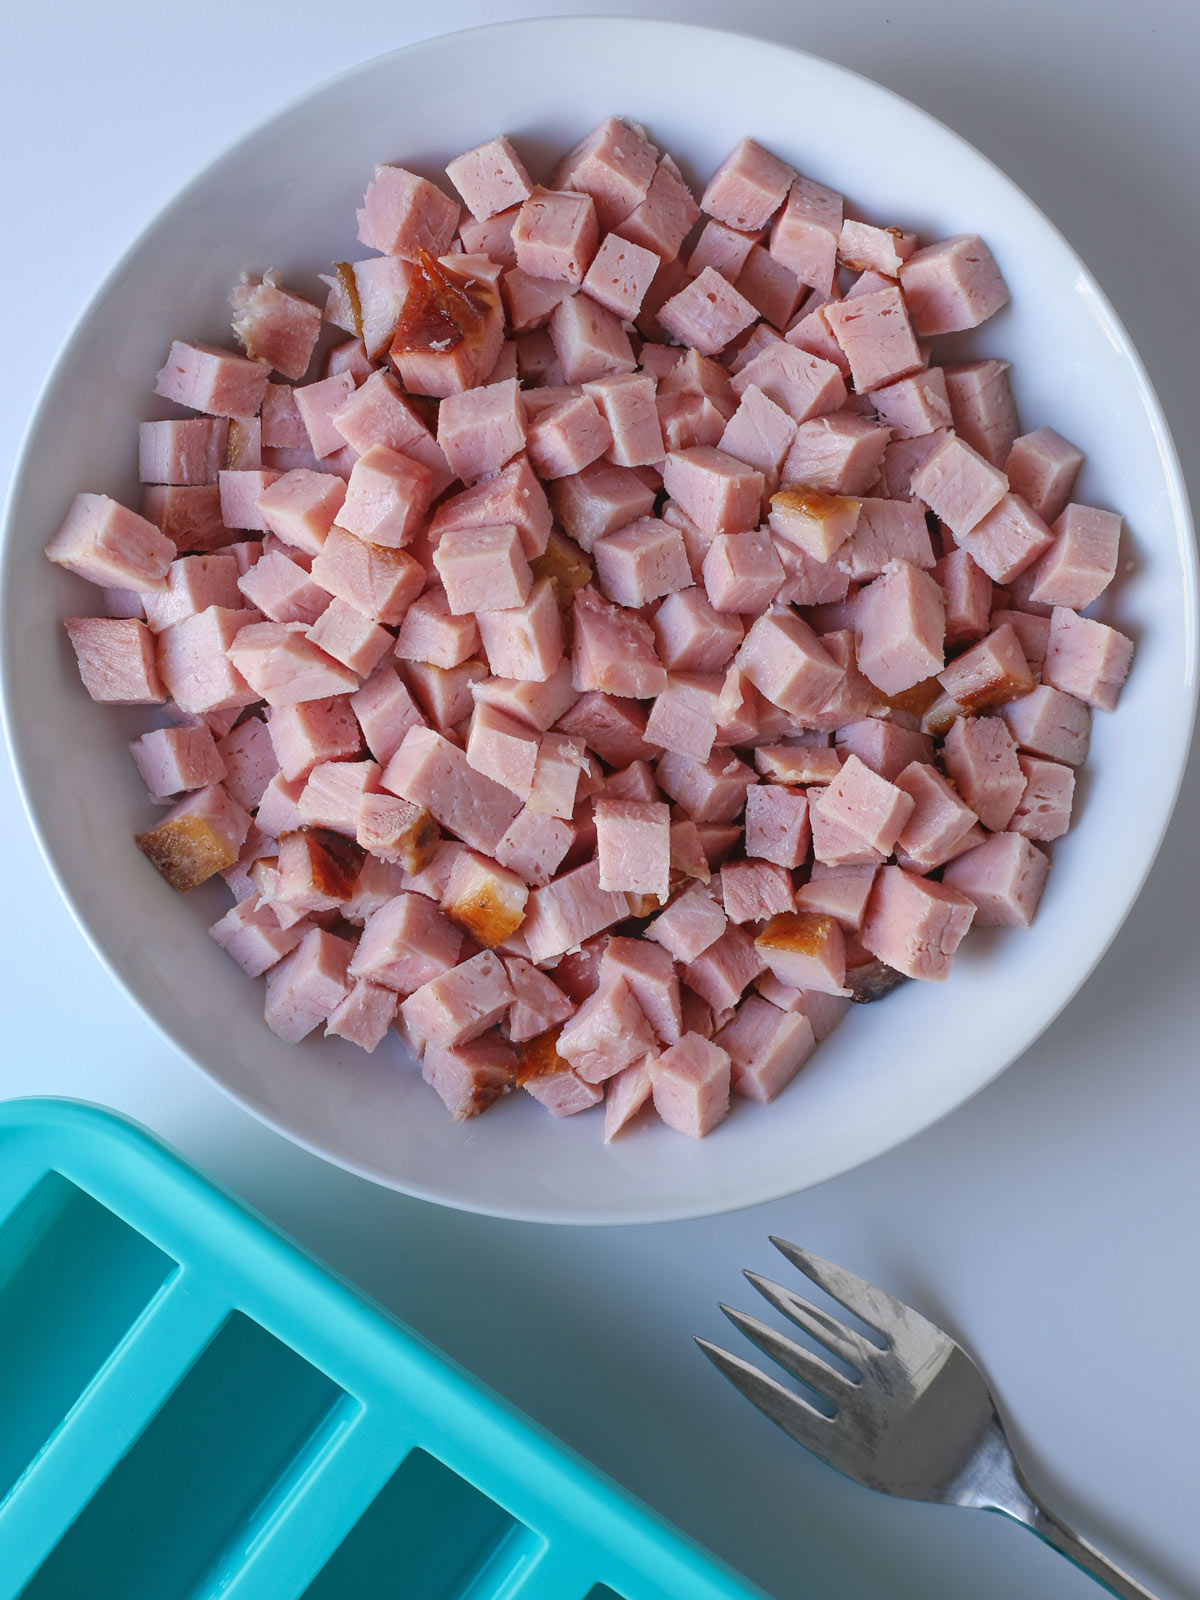 diced ham in a bowl with soupercubes nearby.